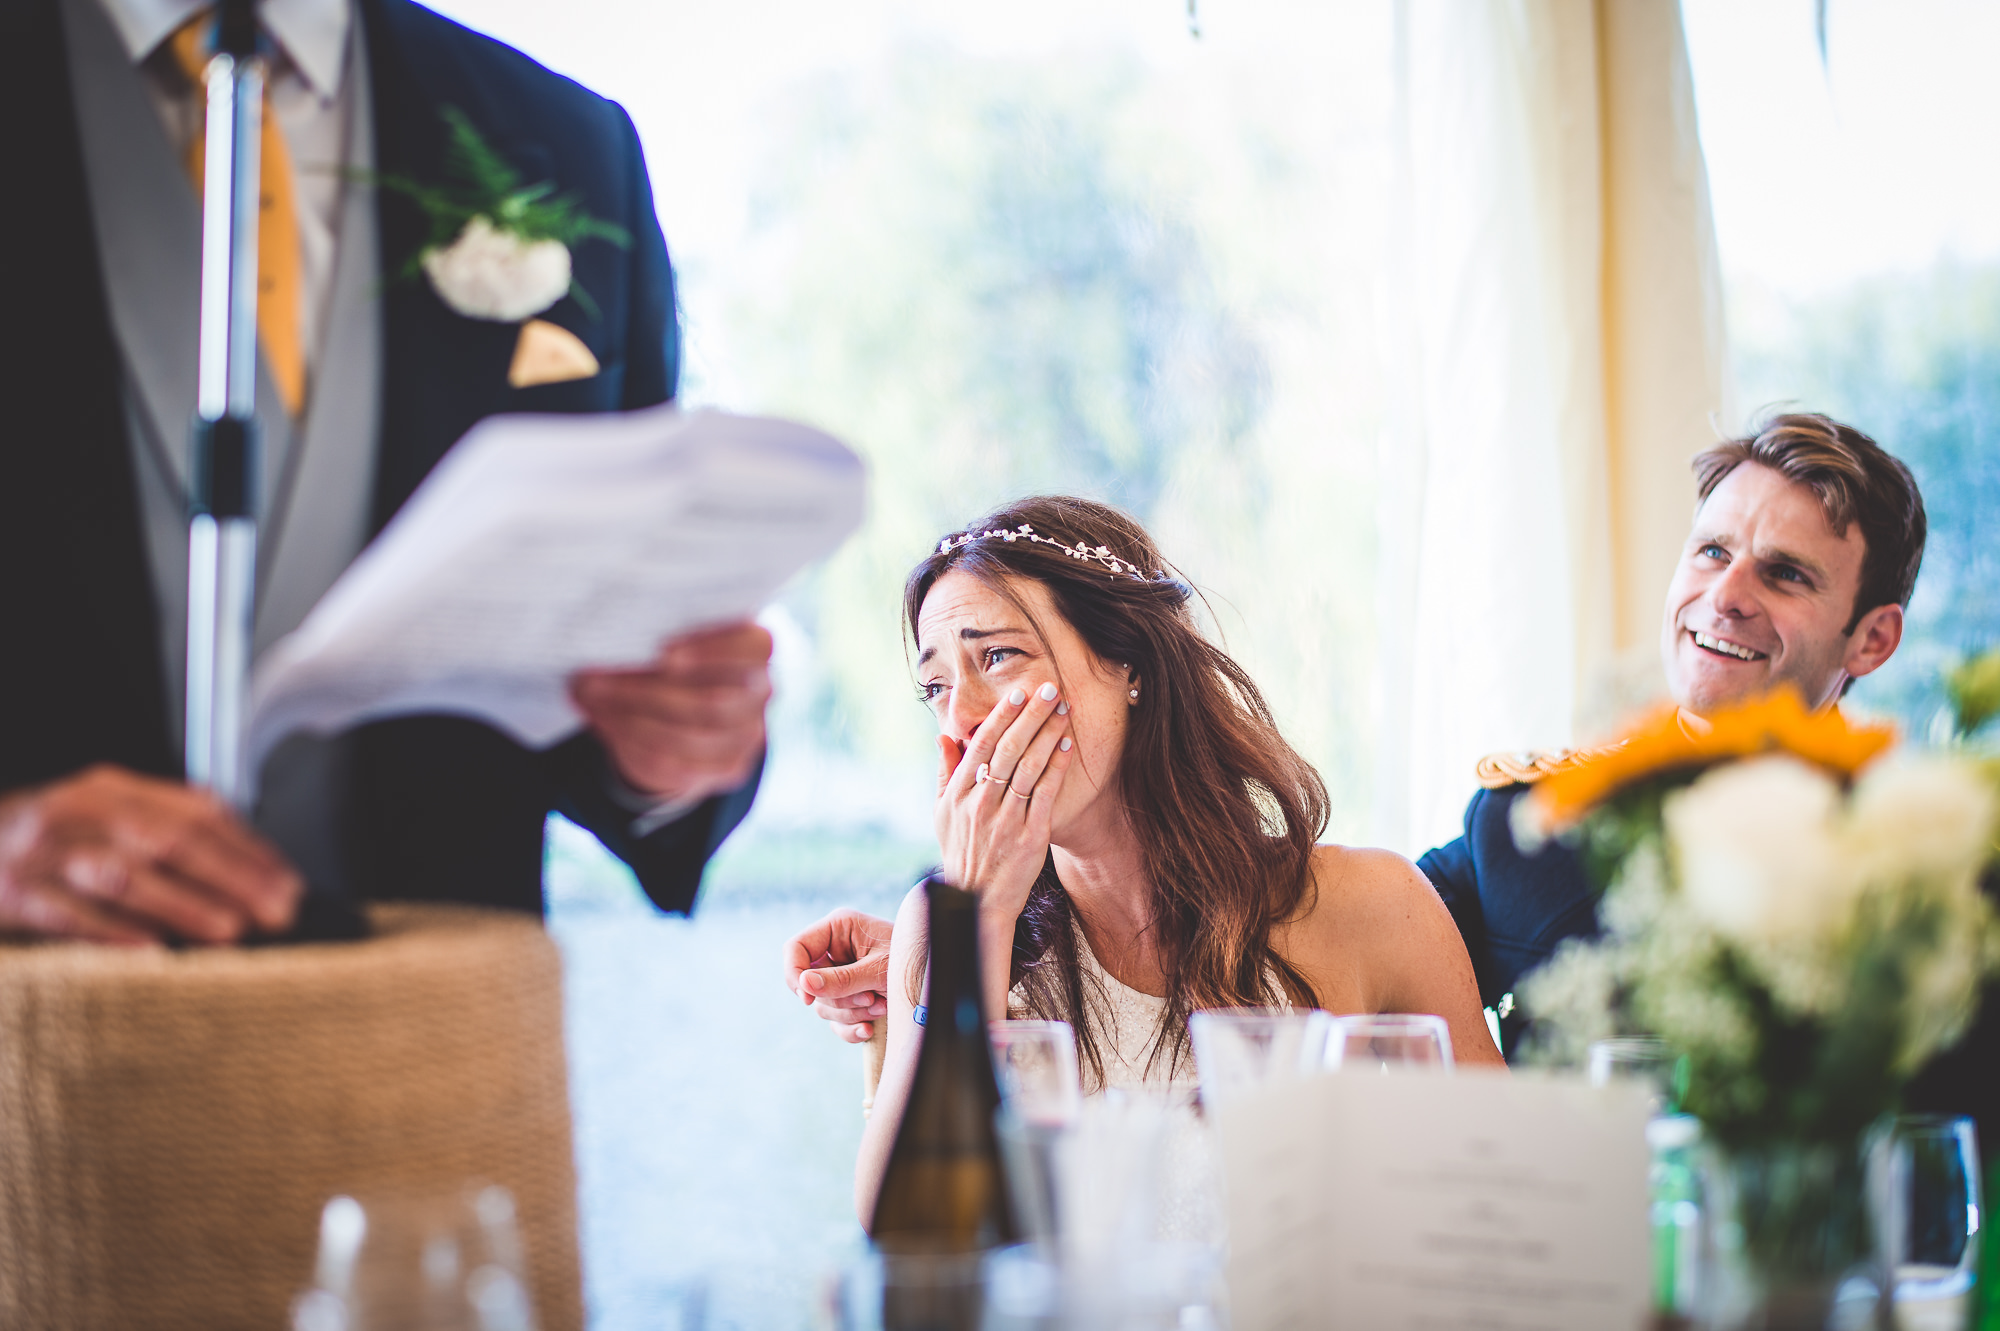 A wedding photographer captures a joyful moment of a bride and groom laughing during a wedding speech.